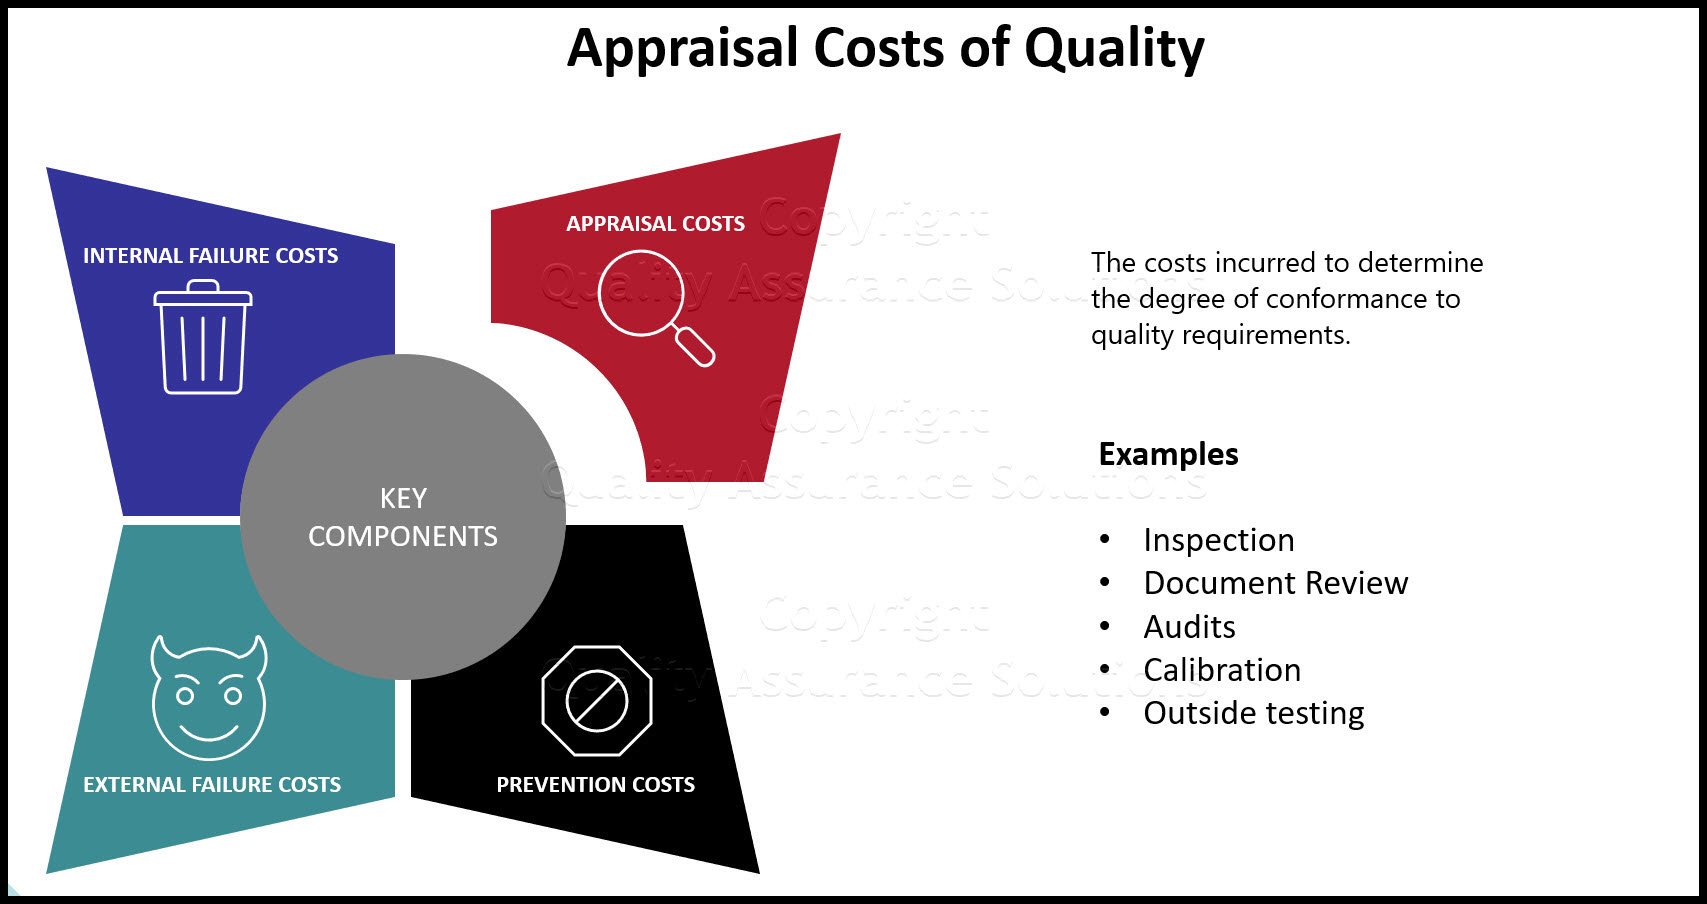 Appraisal Costs are the costs incurred to determine the degree of conformance to quality